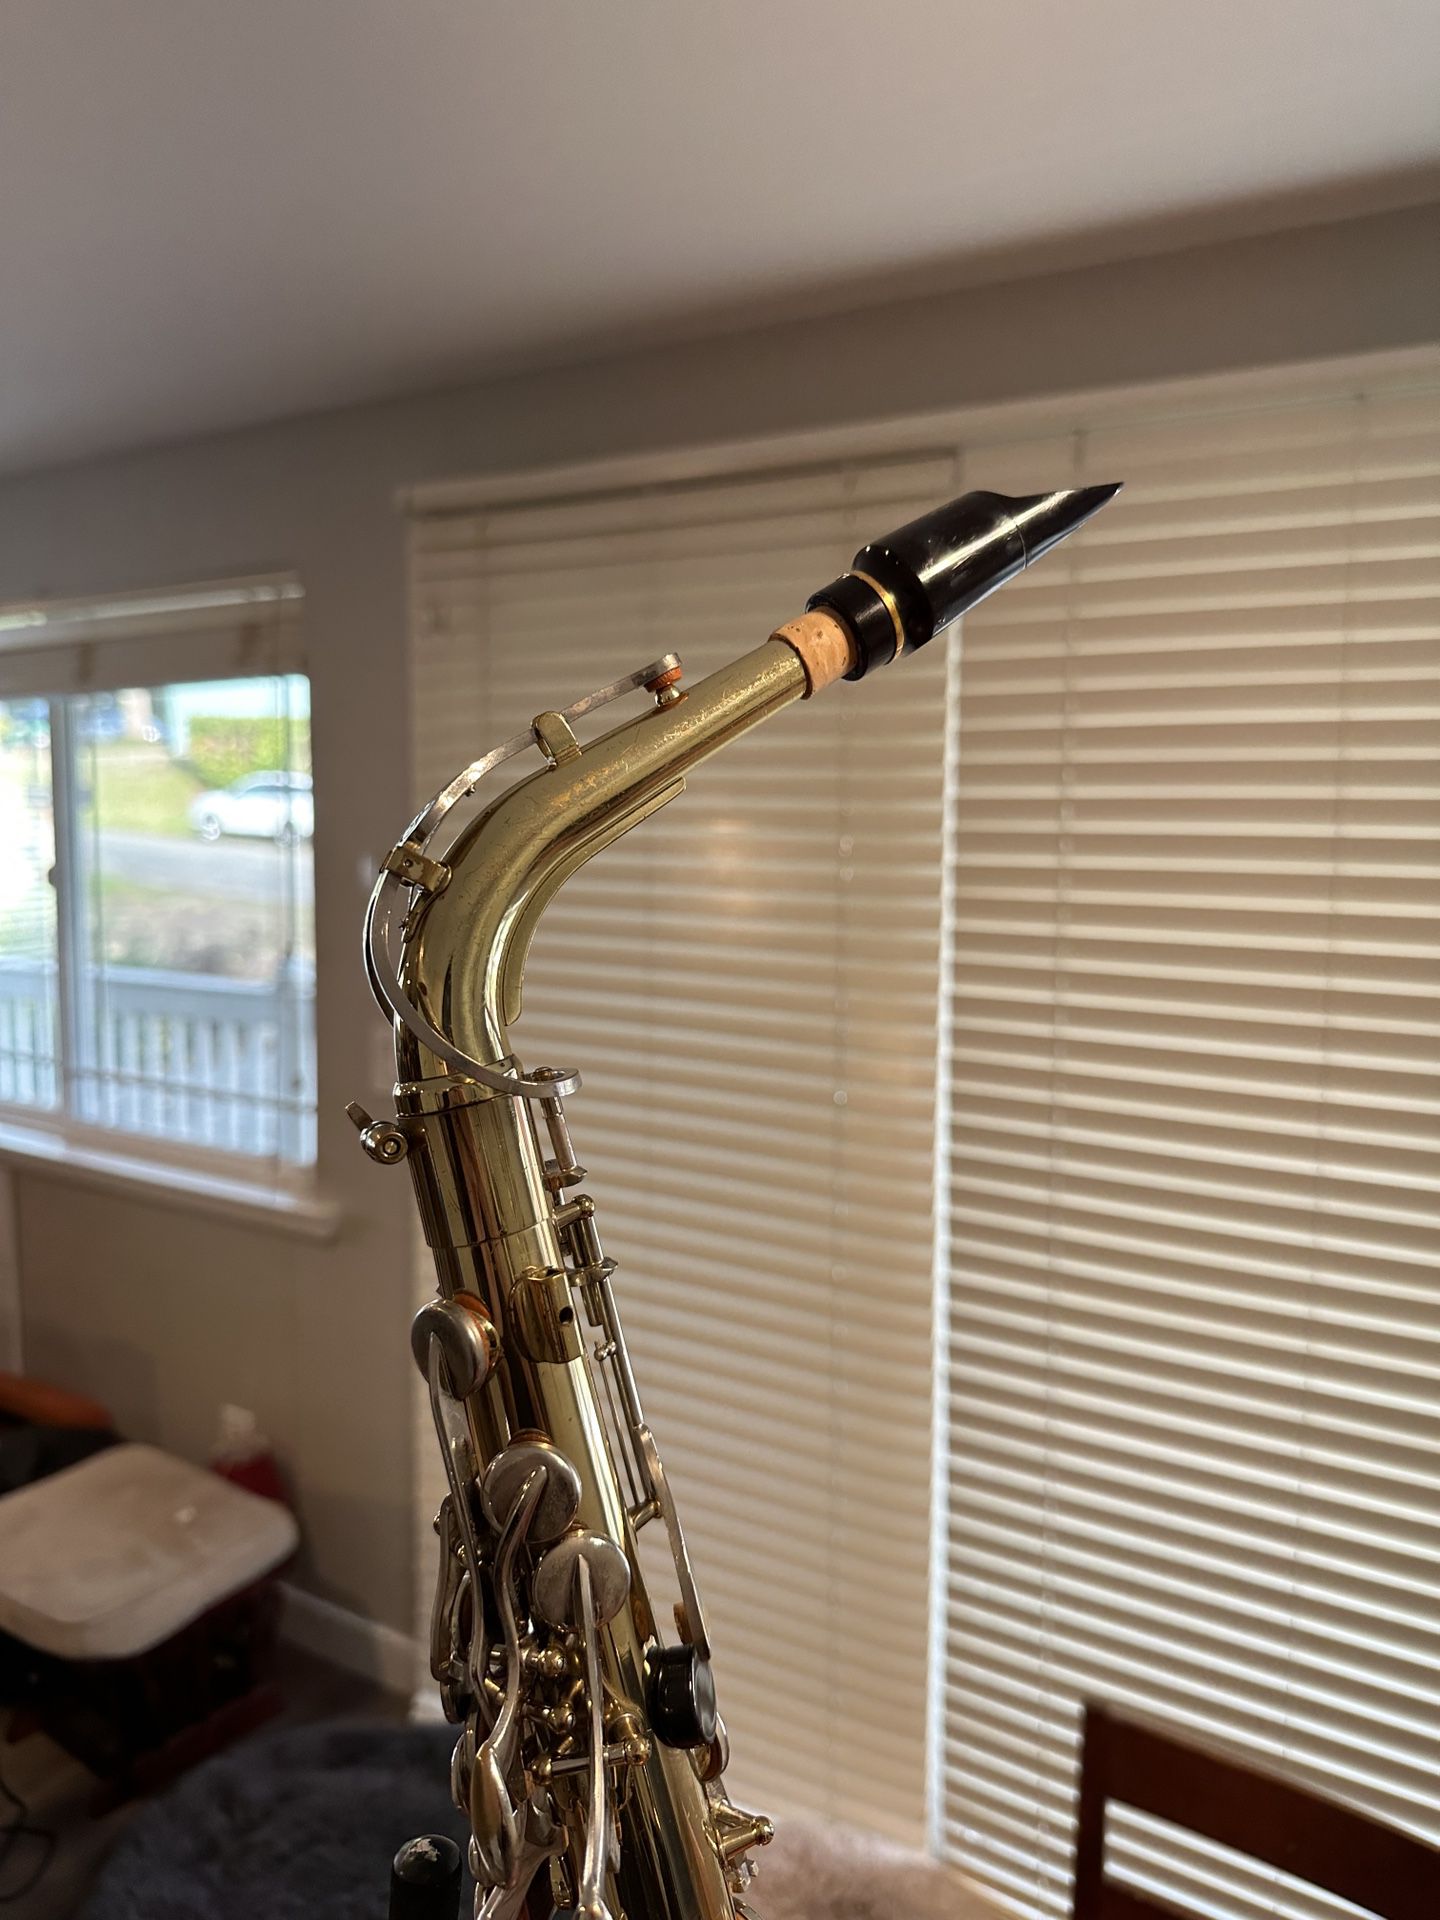 Alto Saxophone - Used, Normal Wear. $450 or best offer